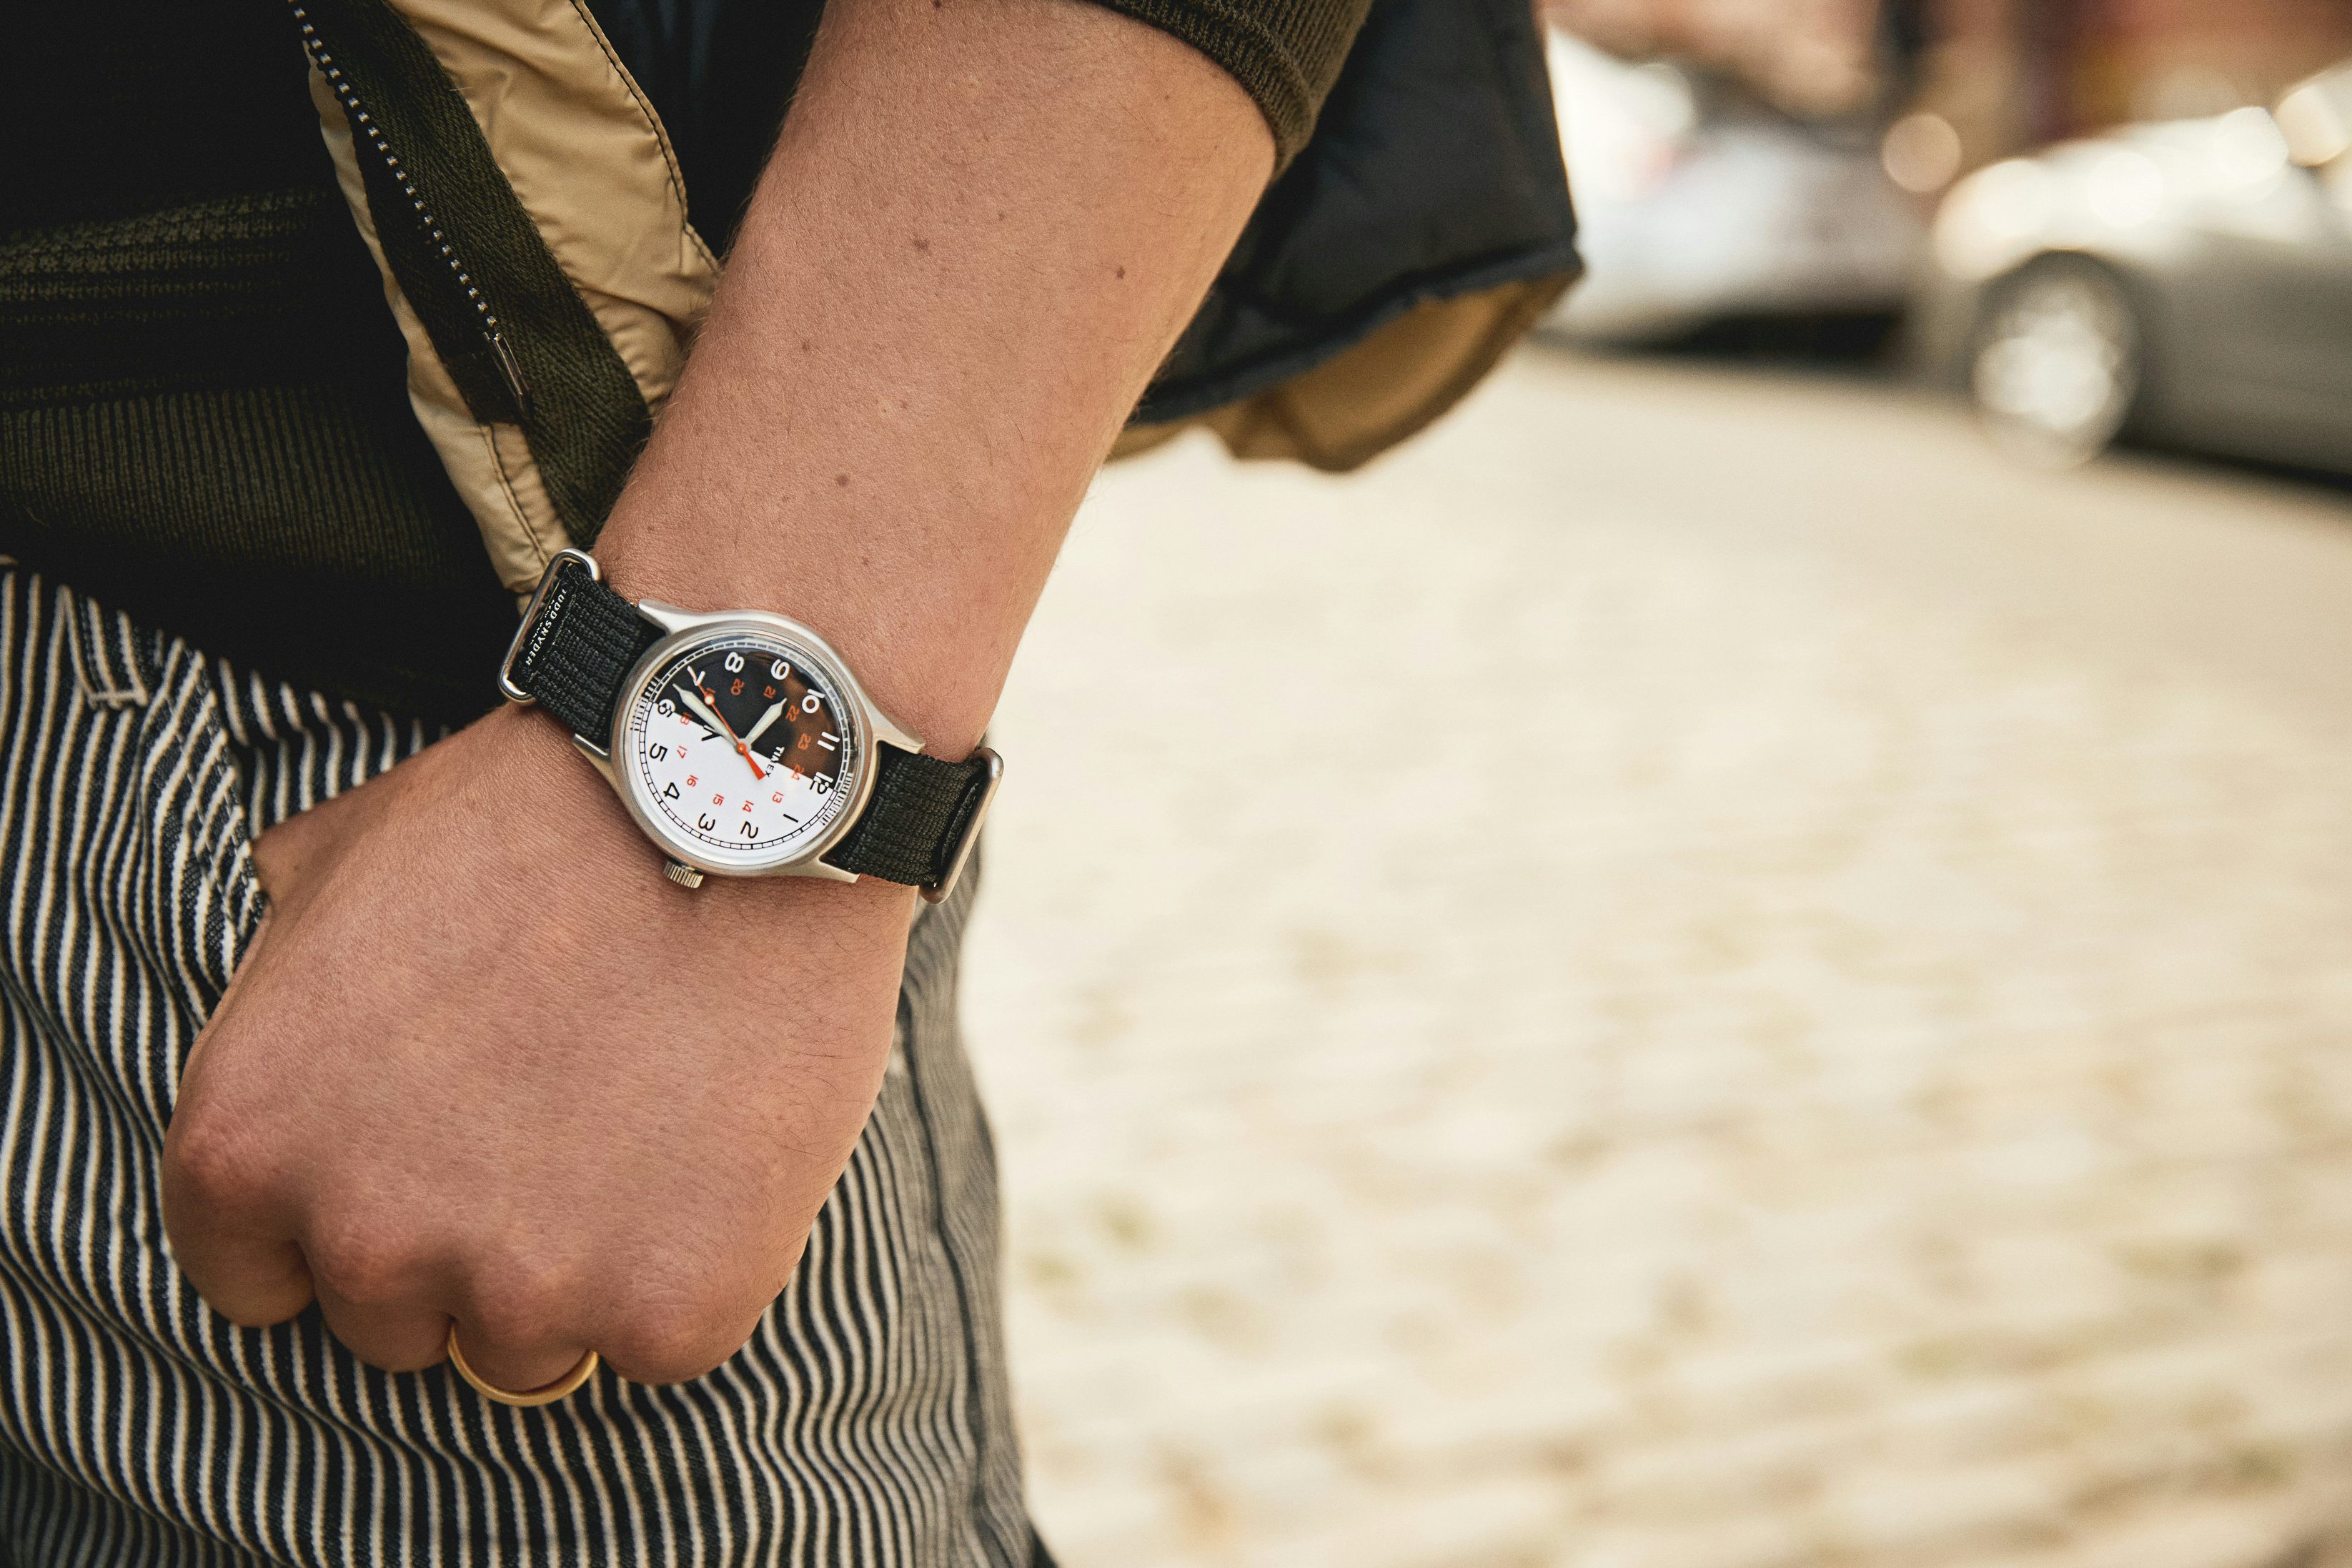 The Timex x Todd Snyder MK1 Black and White Collaboration Watch